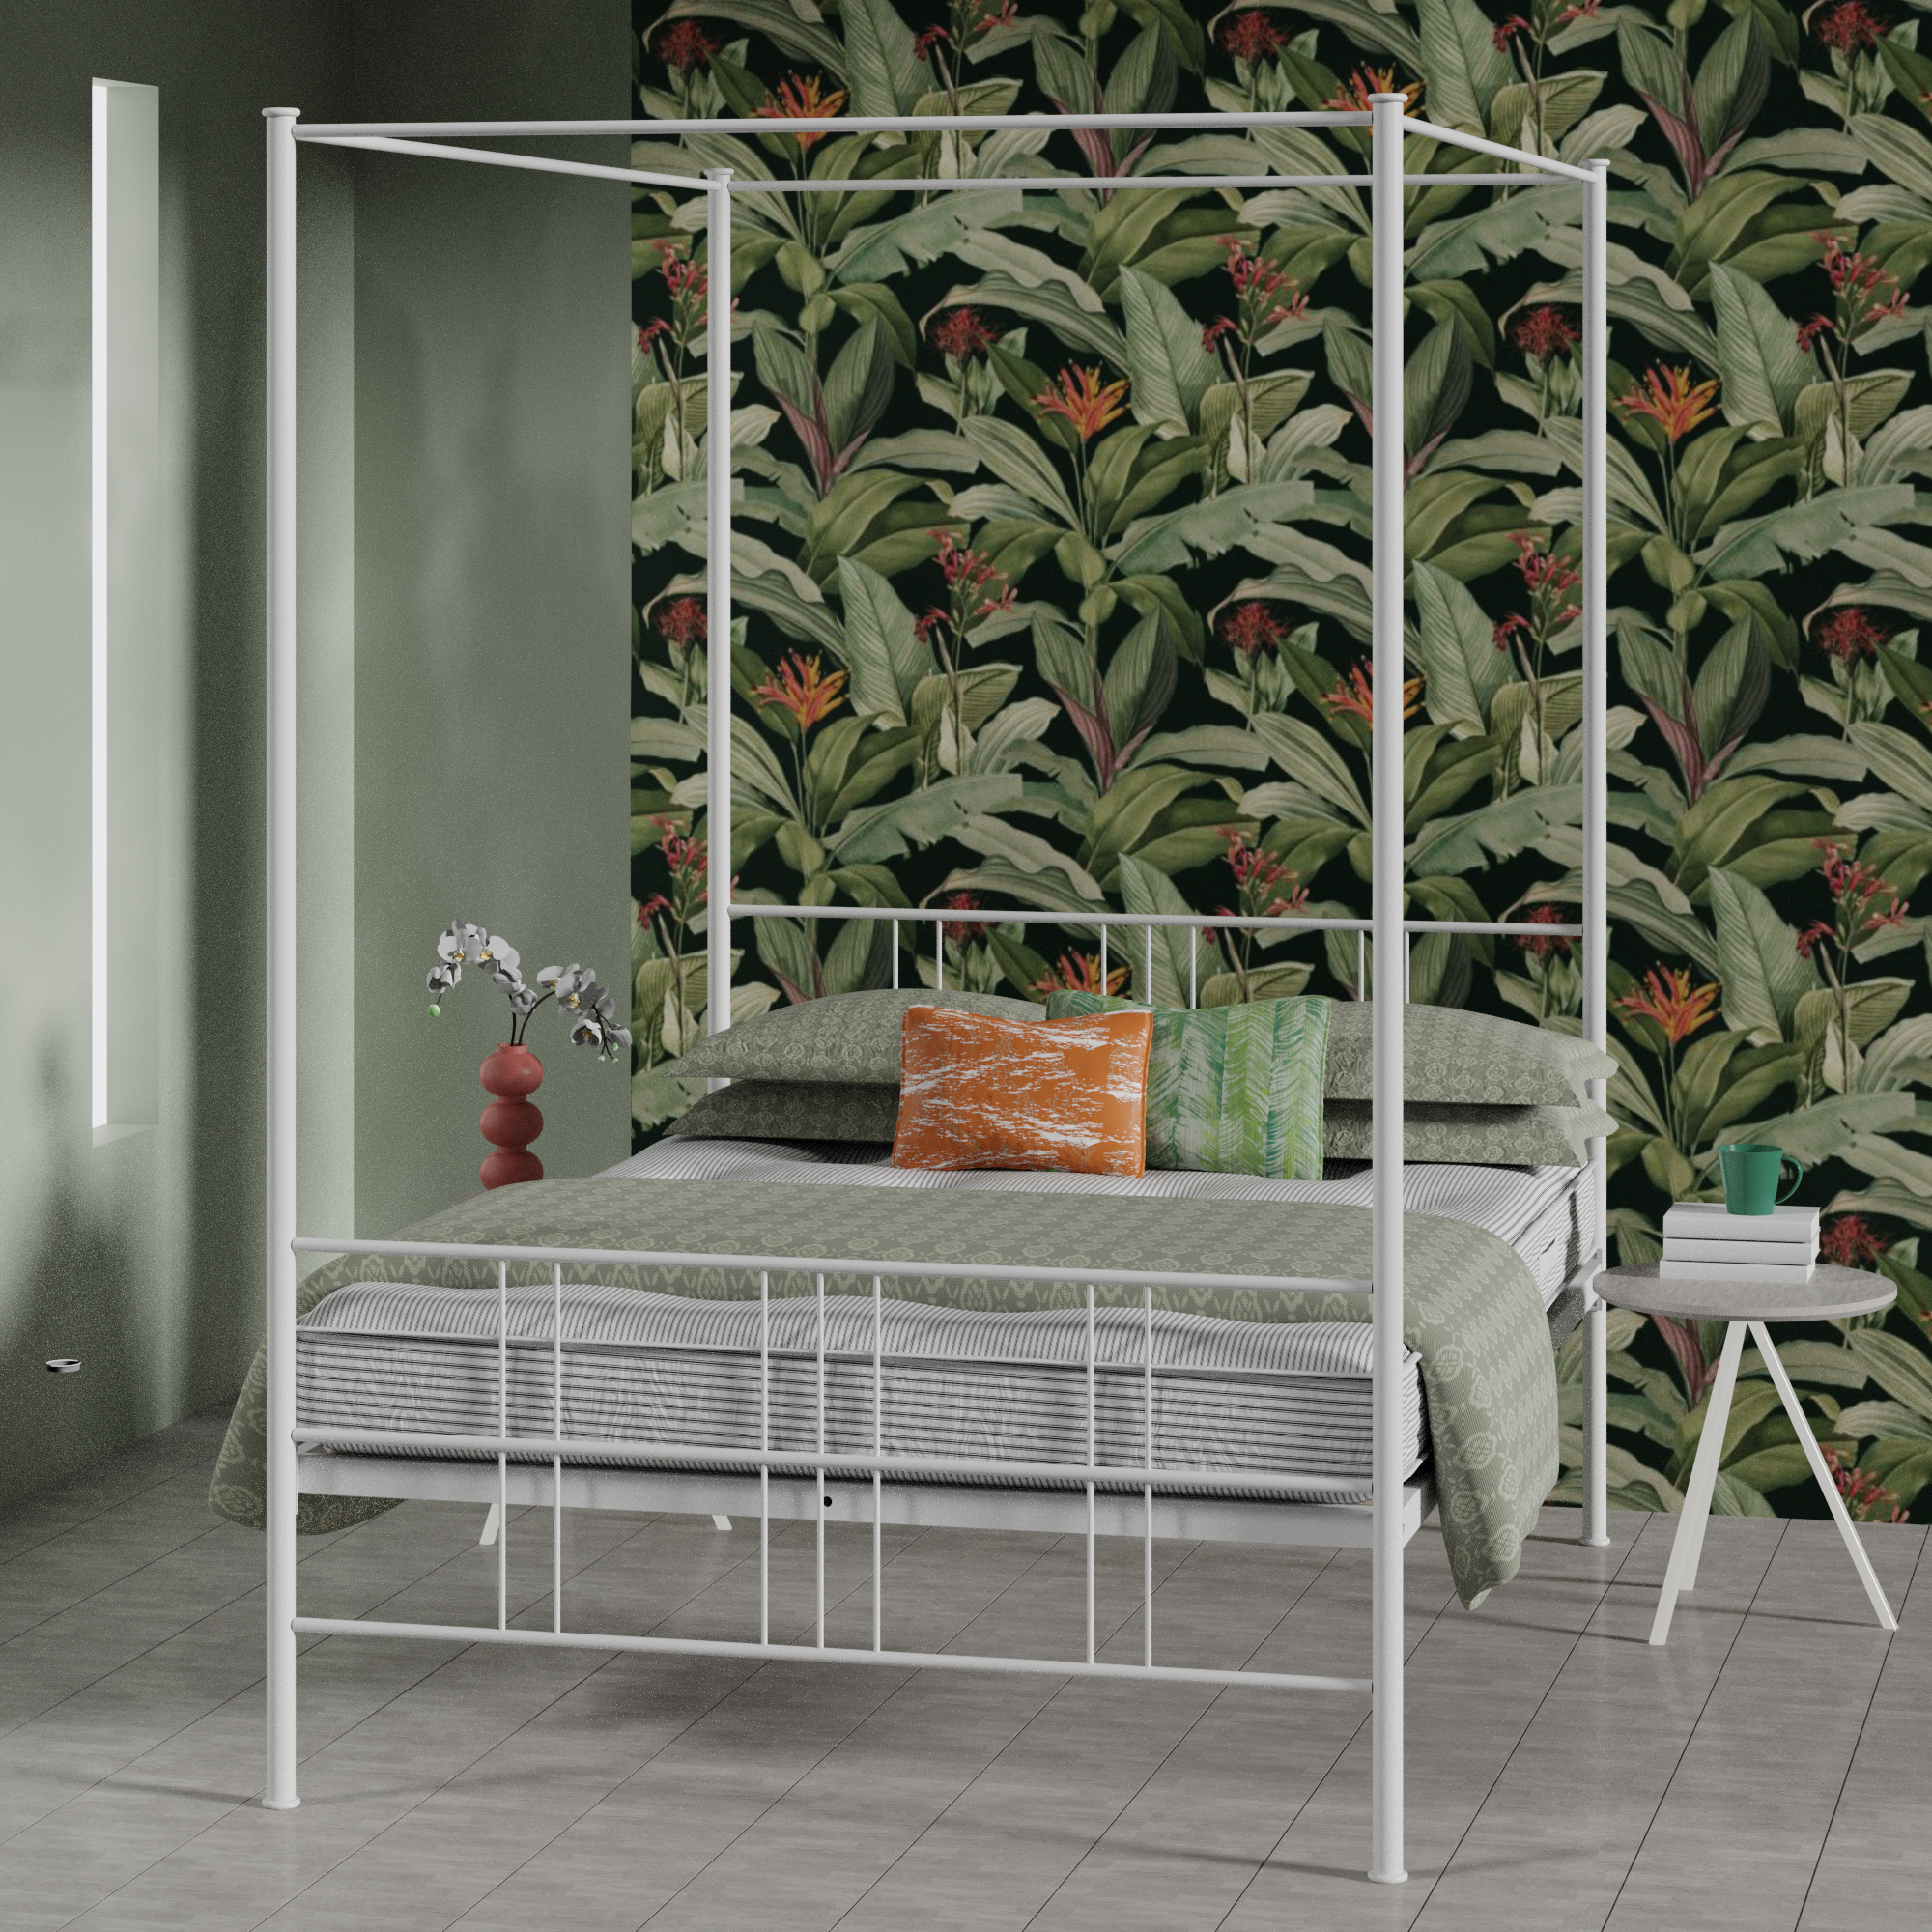 Toulon iron bed - Image emerald green